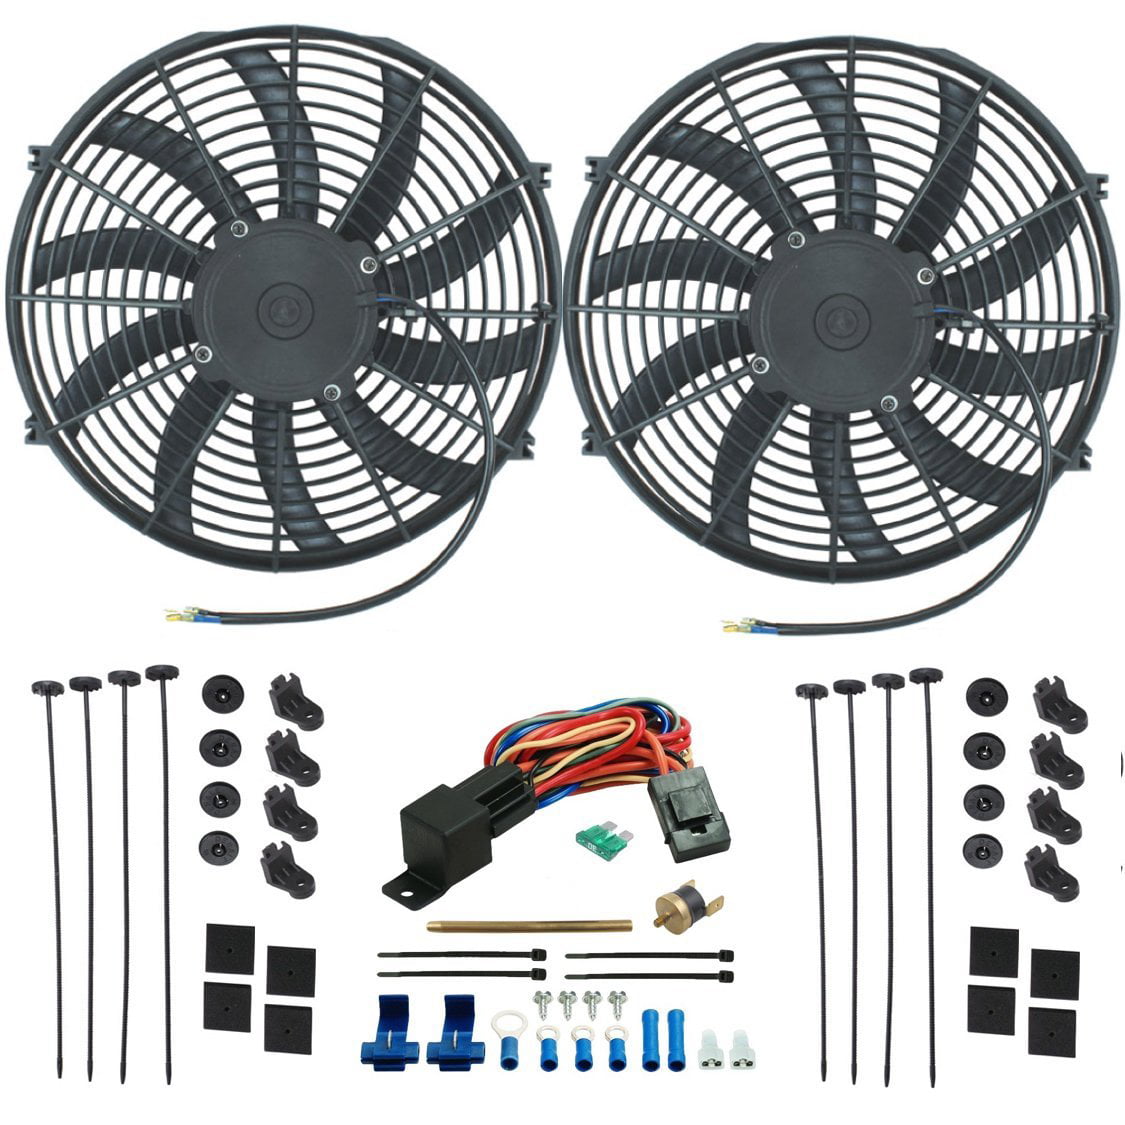 American Volt Heavy Duty 11 Transmission Oil Cooler 9 Inch Electric Fan & Push-in Probe Thermostat Switch Kit 180F On - 165F Off